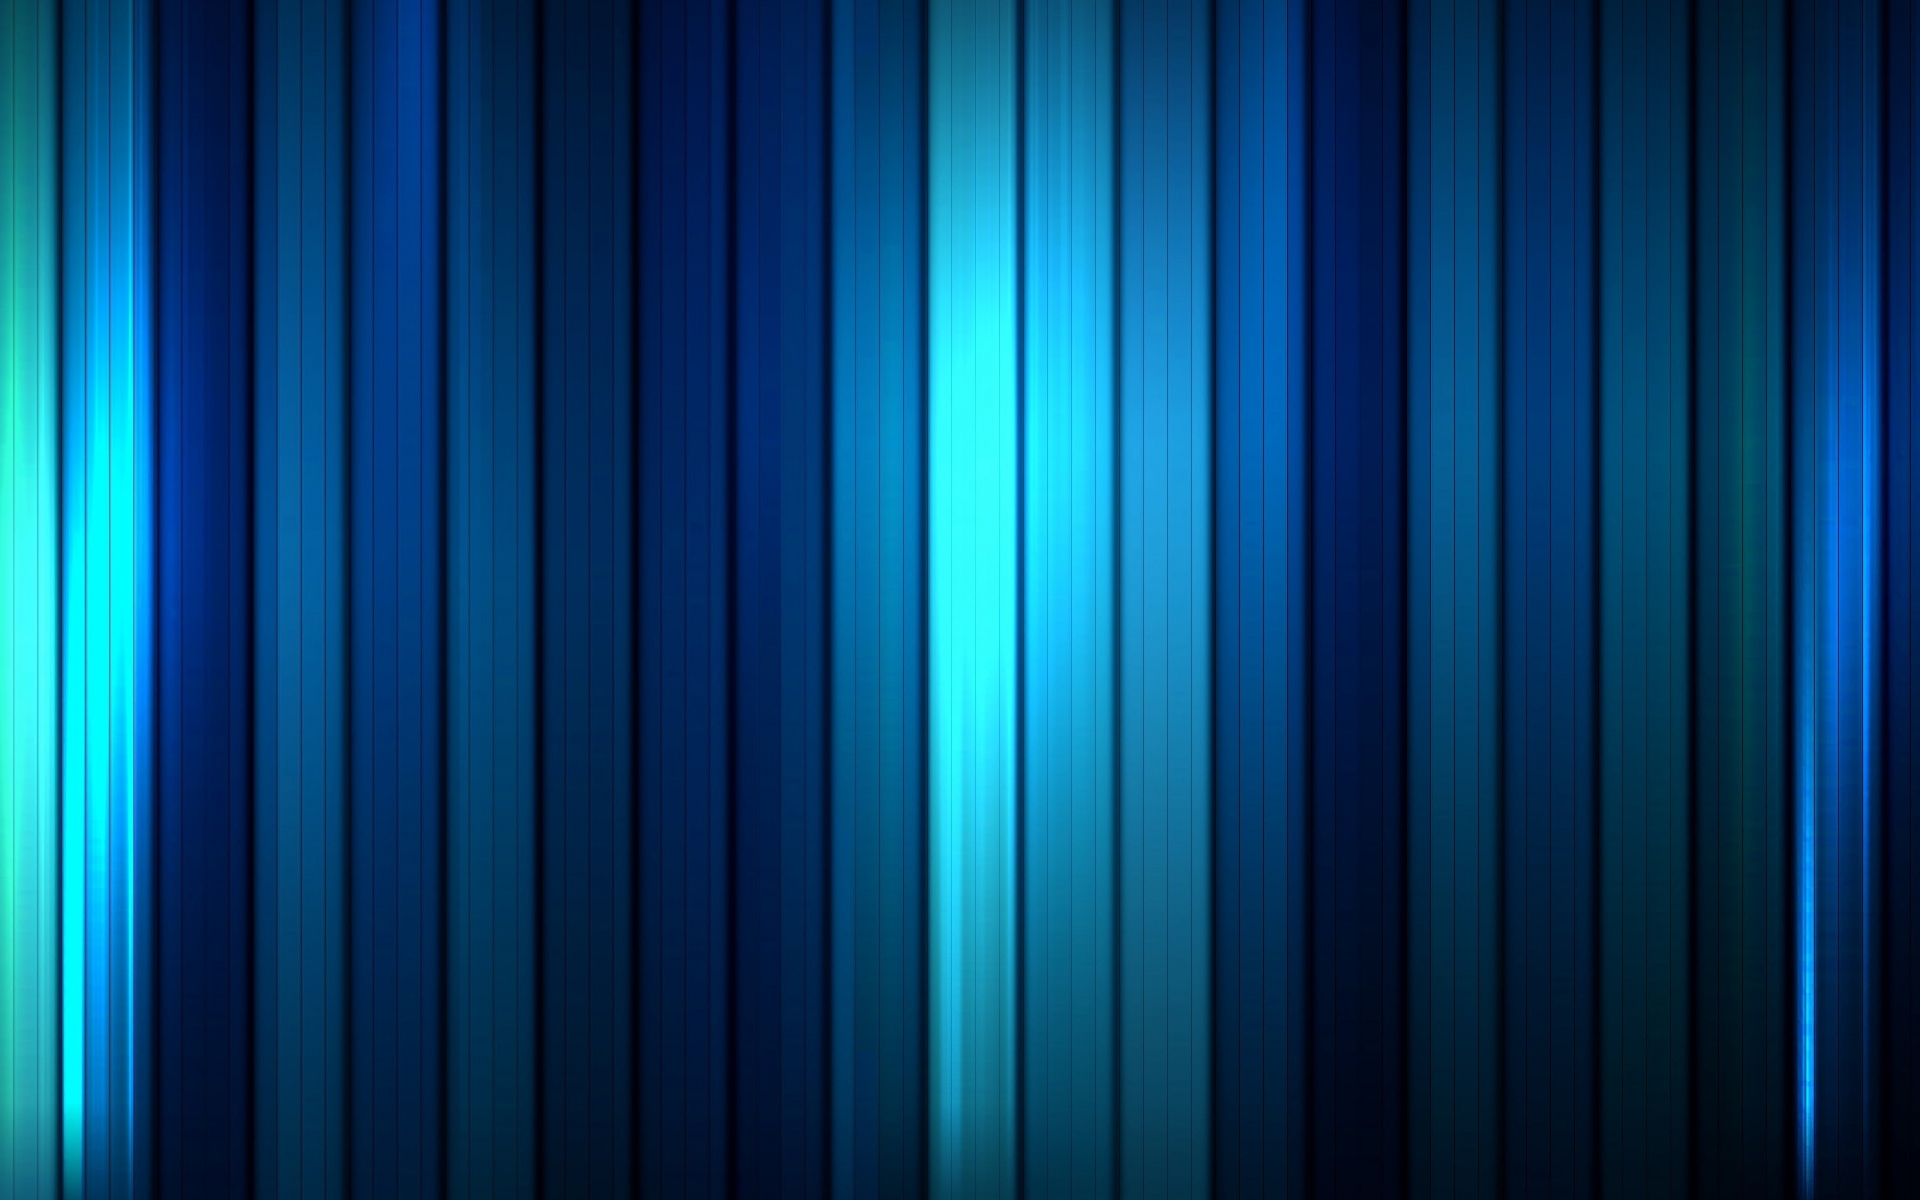 Motion Stripes for 1920 x 1200 widescreen resolution